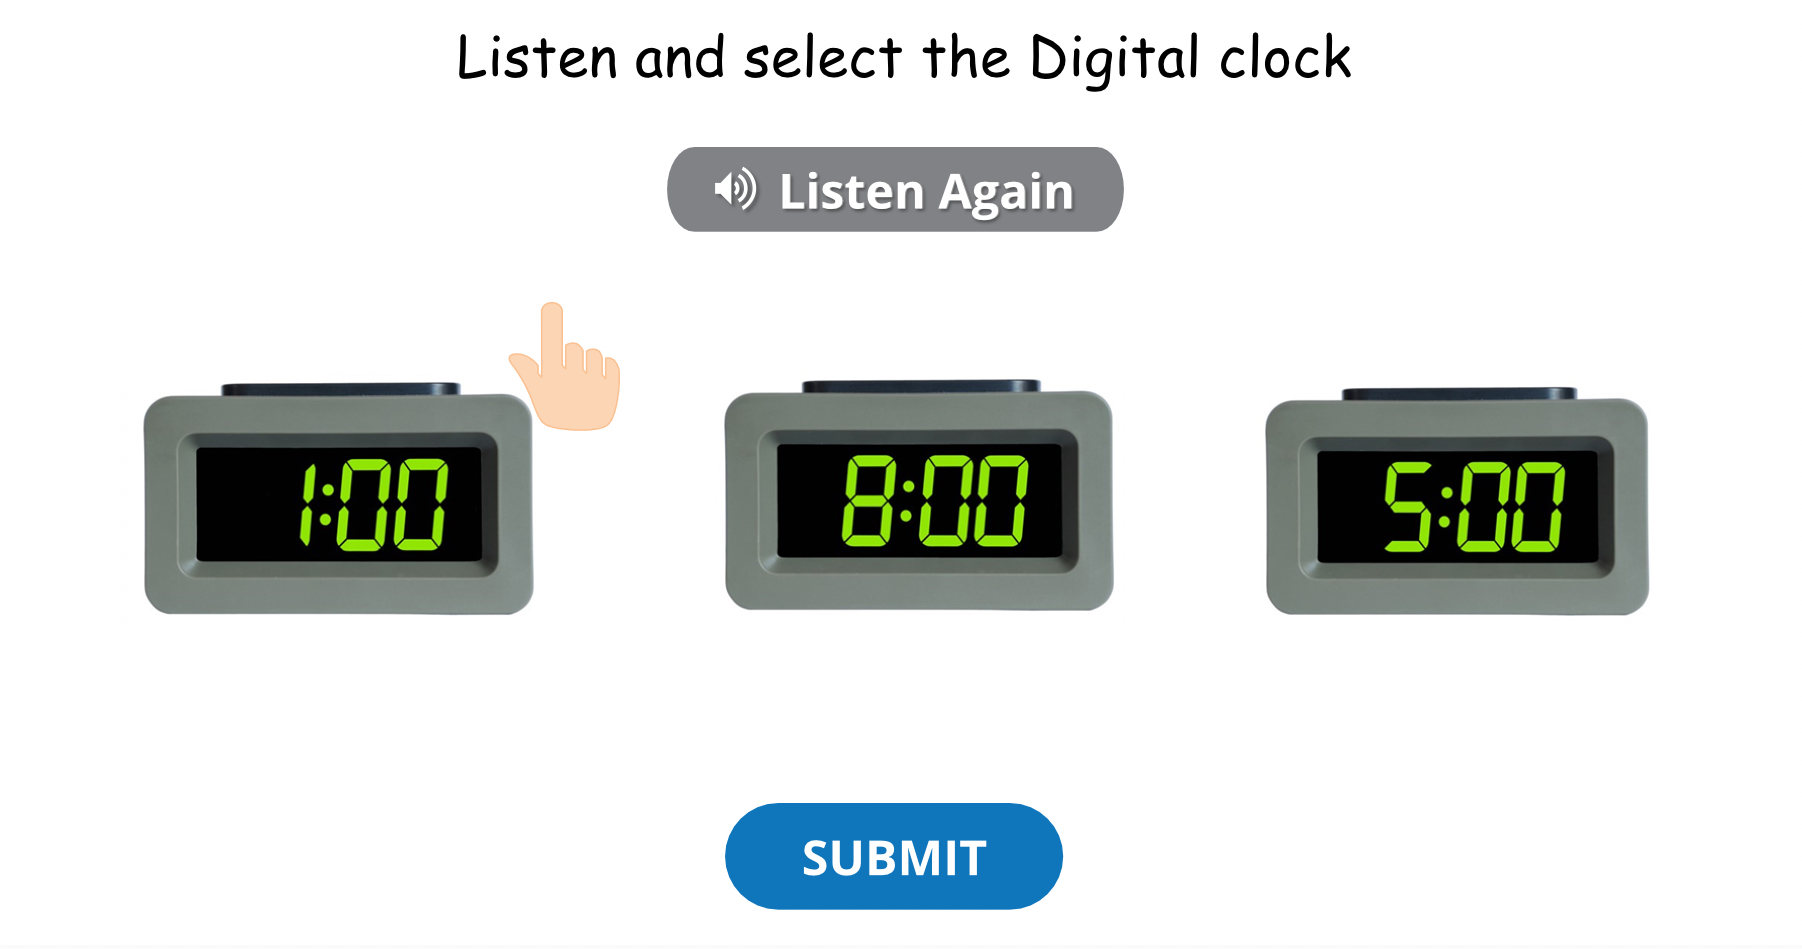 Listen and select the digital clock